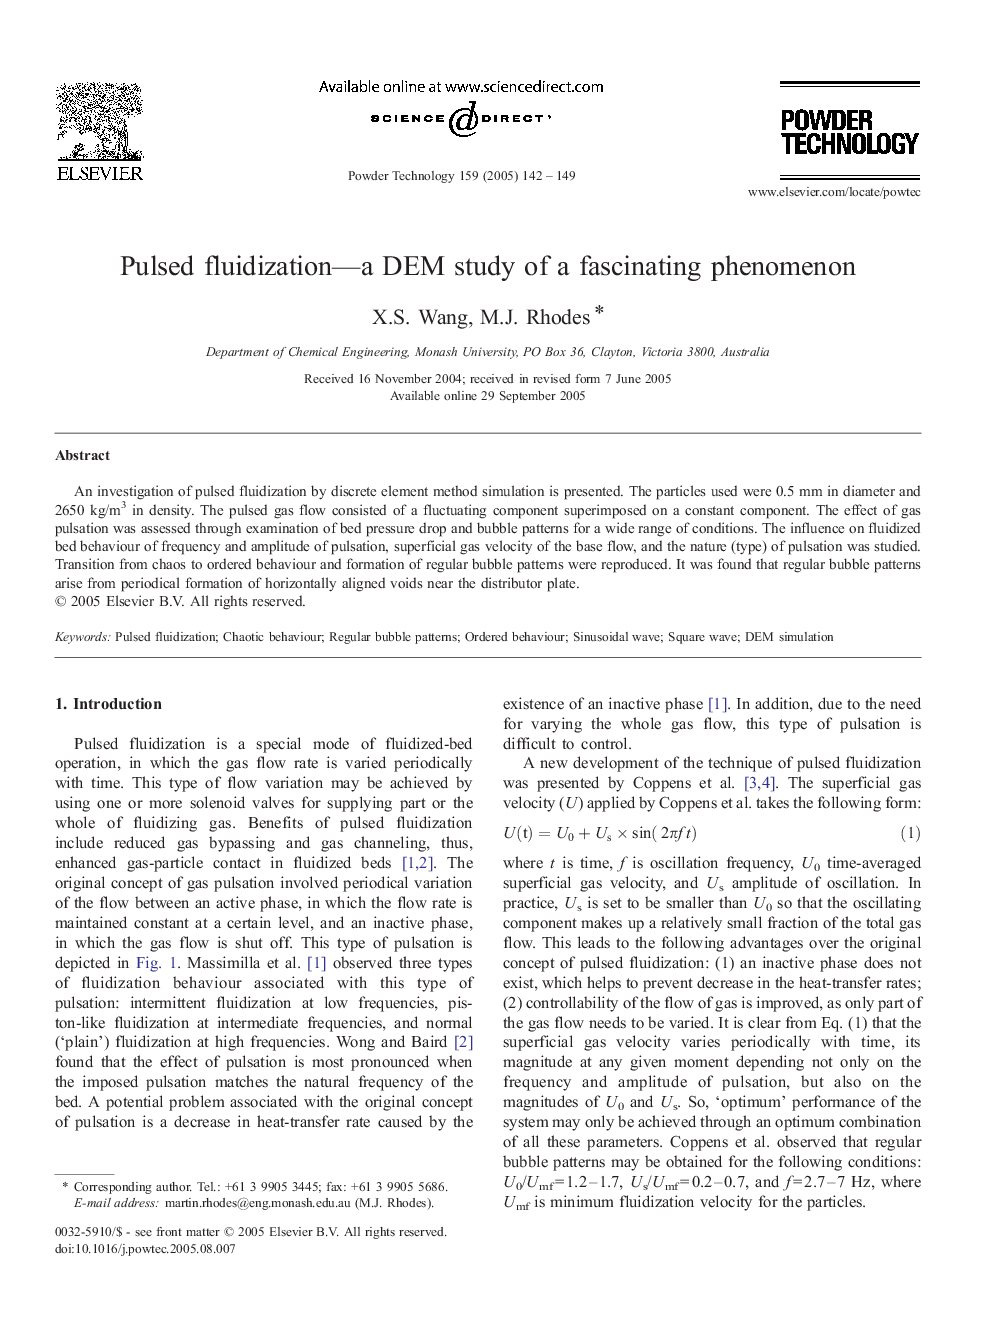 Pulsed fluidization-a DEM study of a fascinating phenomenon